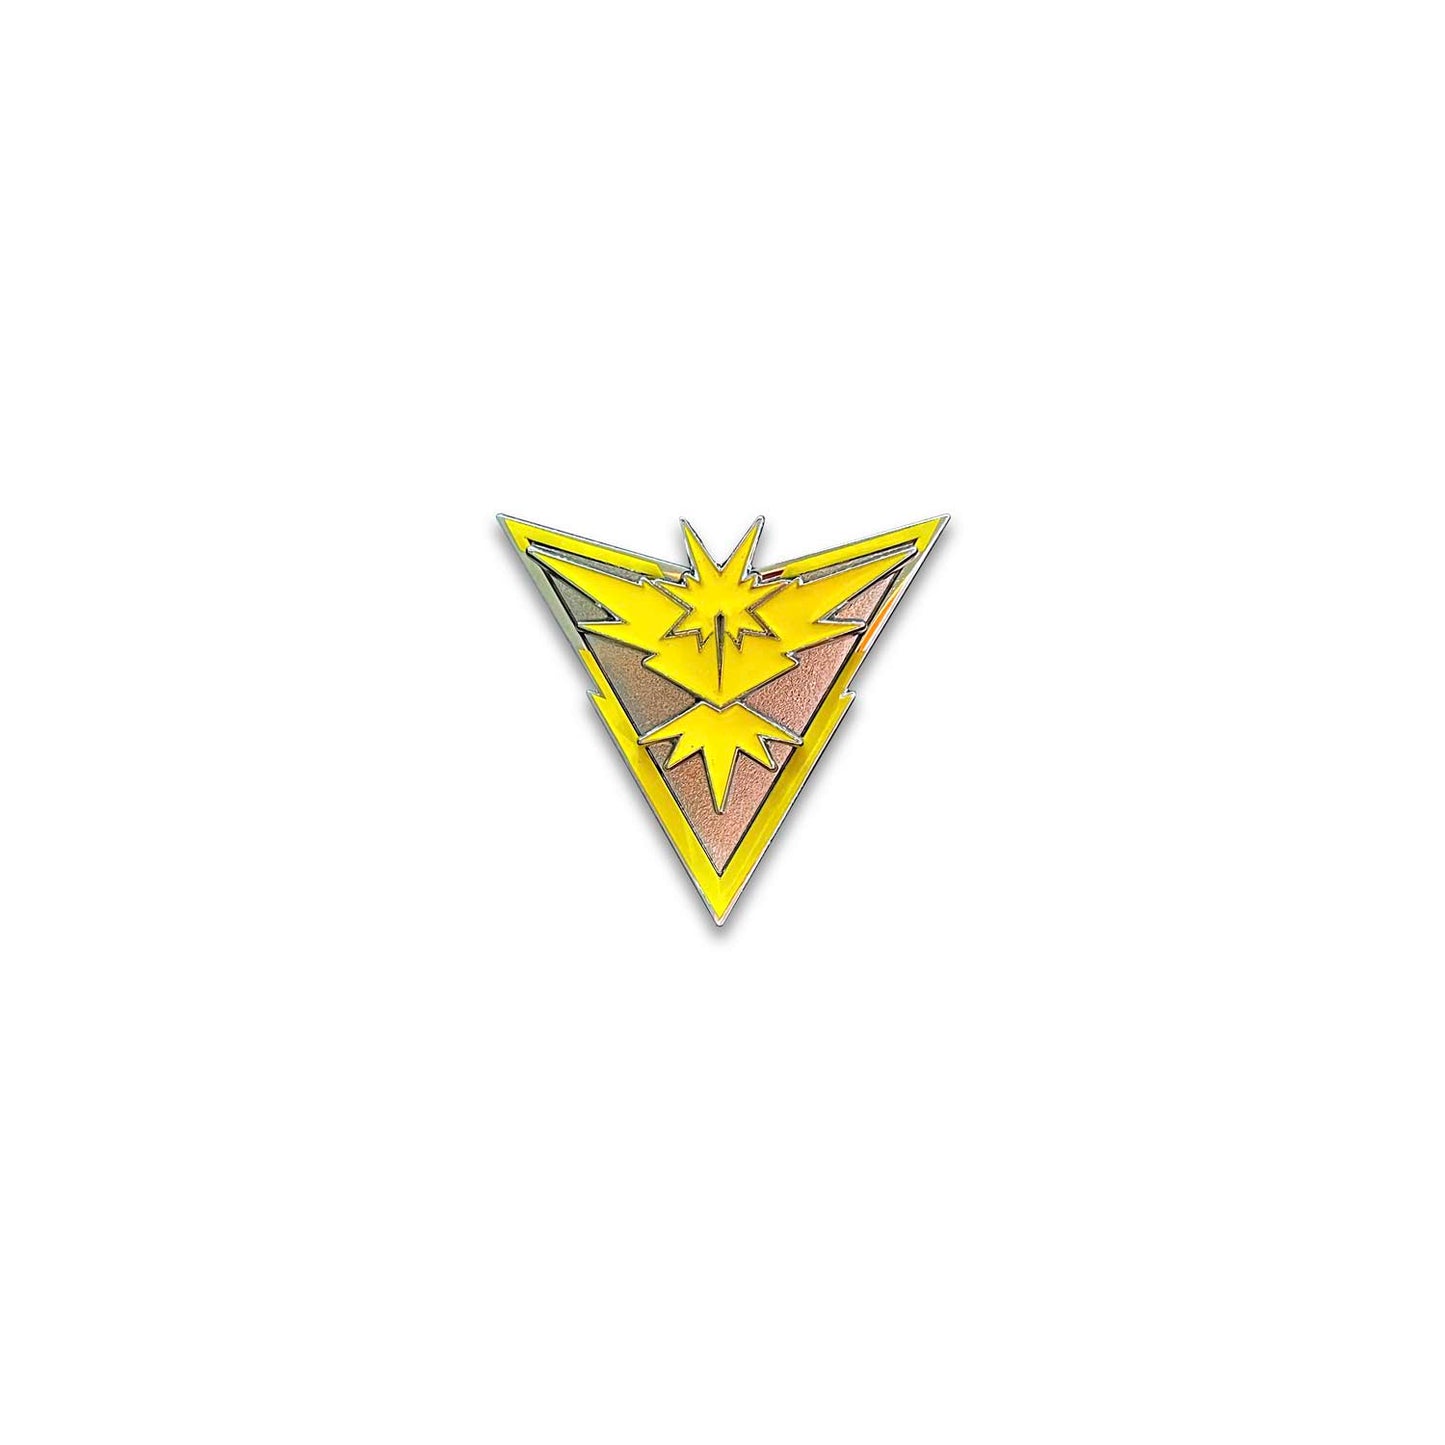 Sample pin included in box. This one is the yellow deluxe pin featuring Zapdos from Team Instinct. 